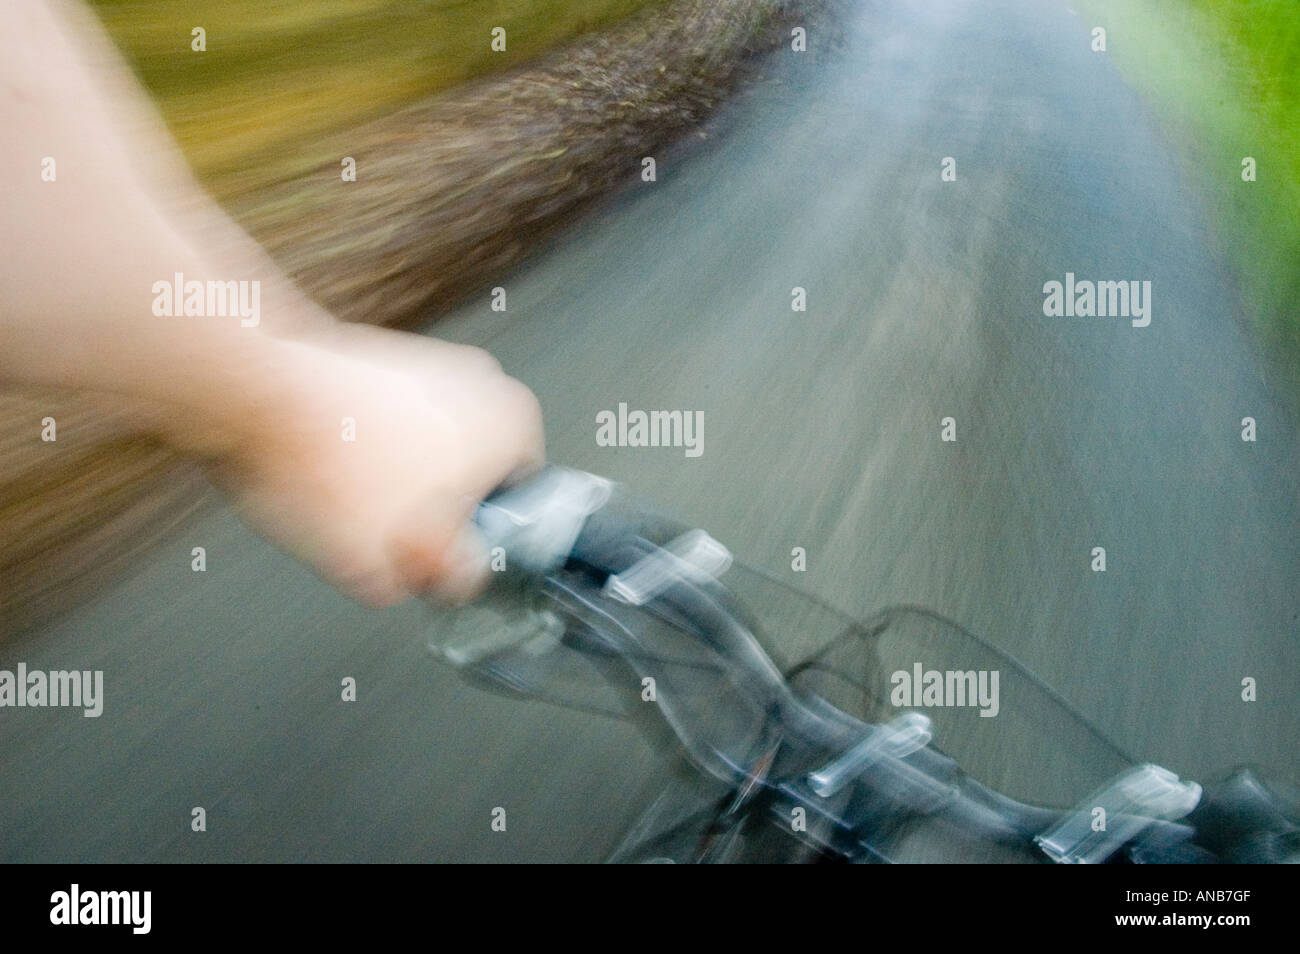 Blurred motion image of a bike in motion Stock Photo